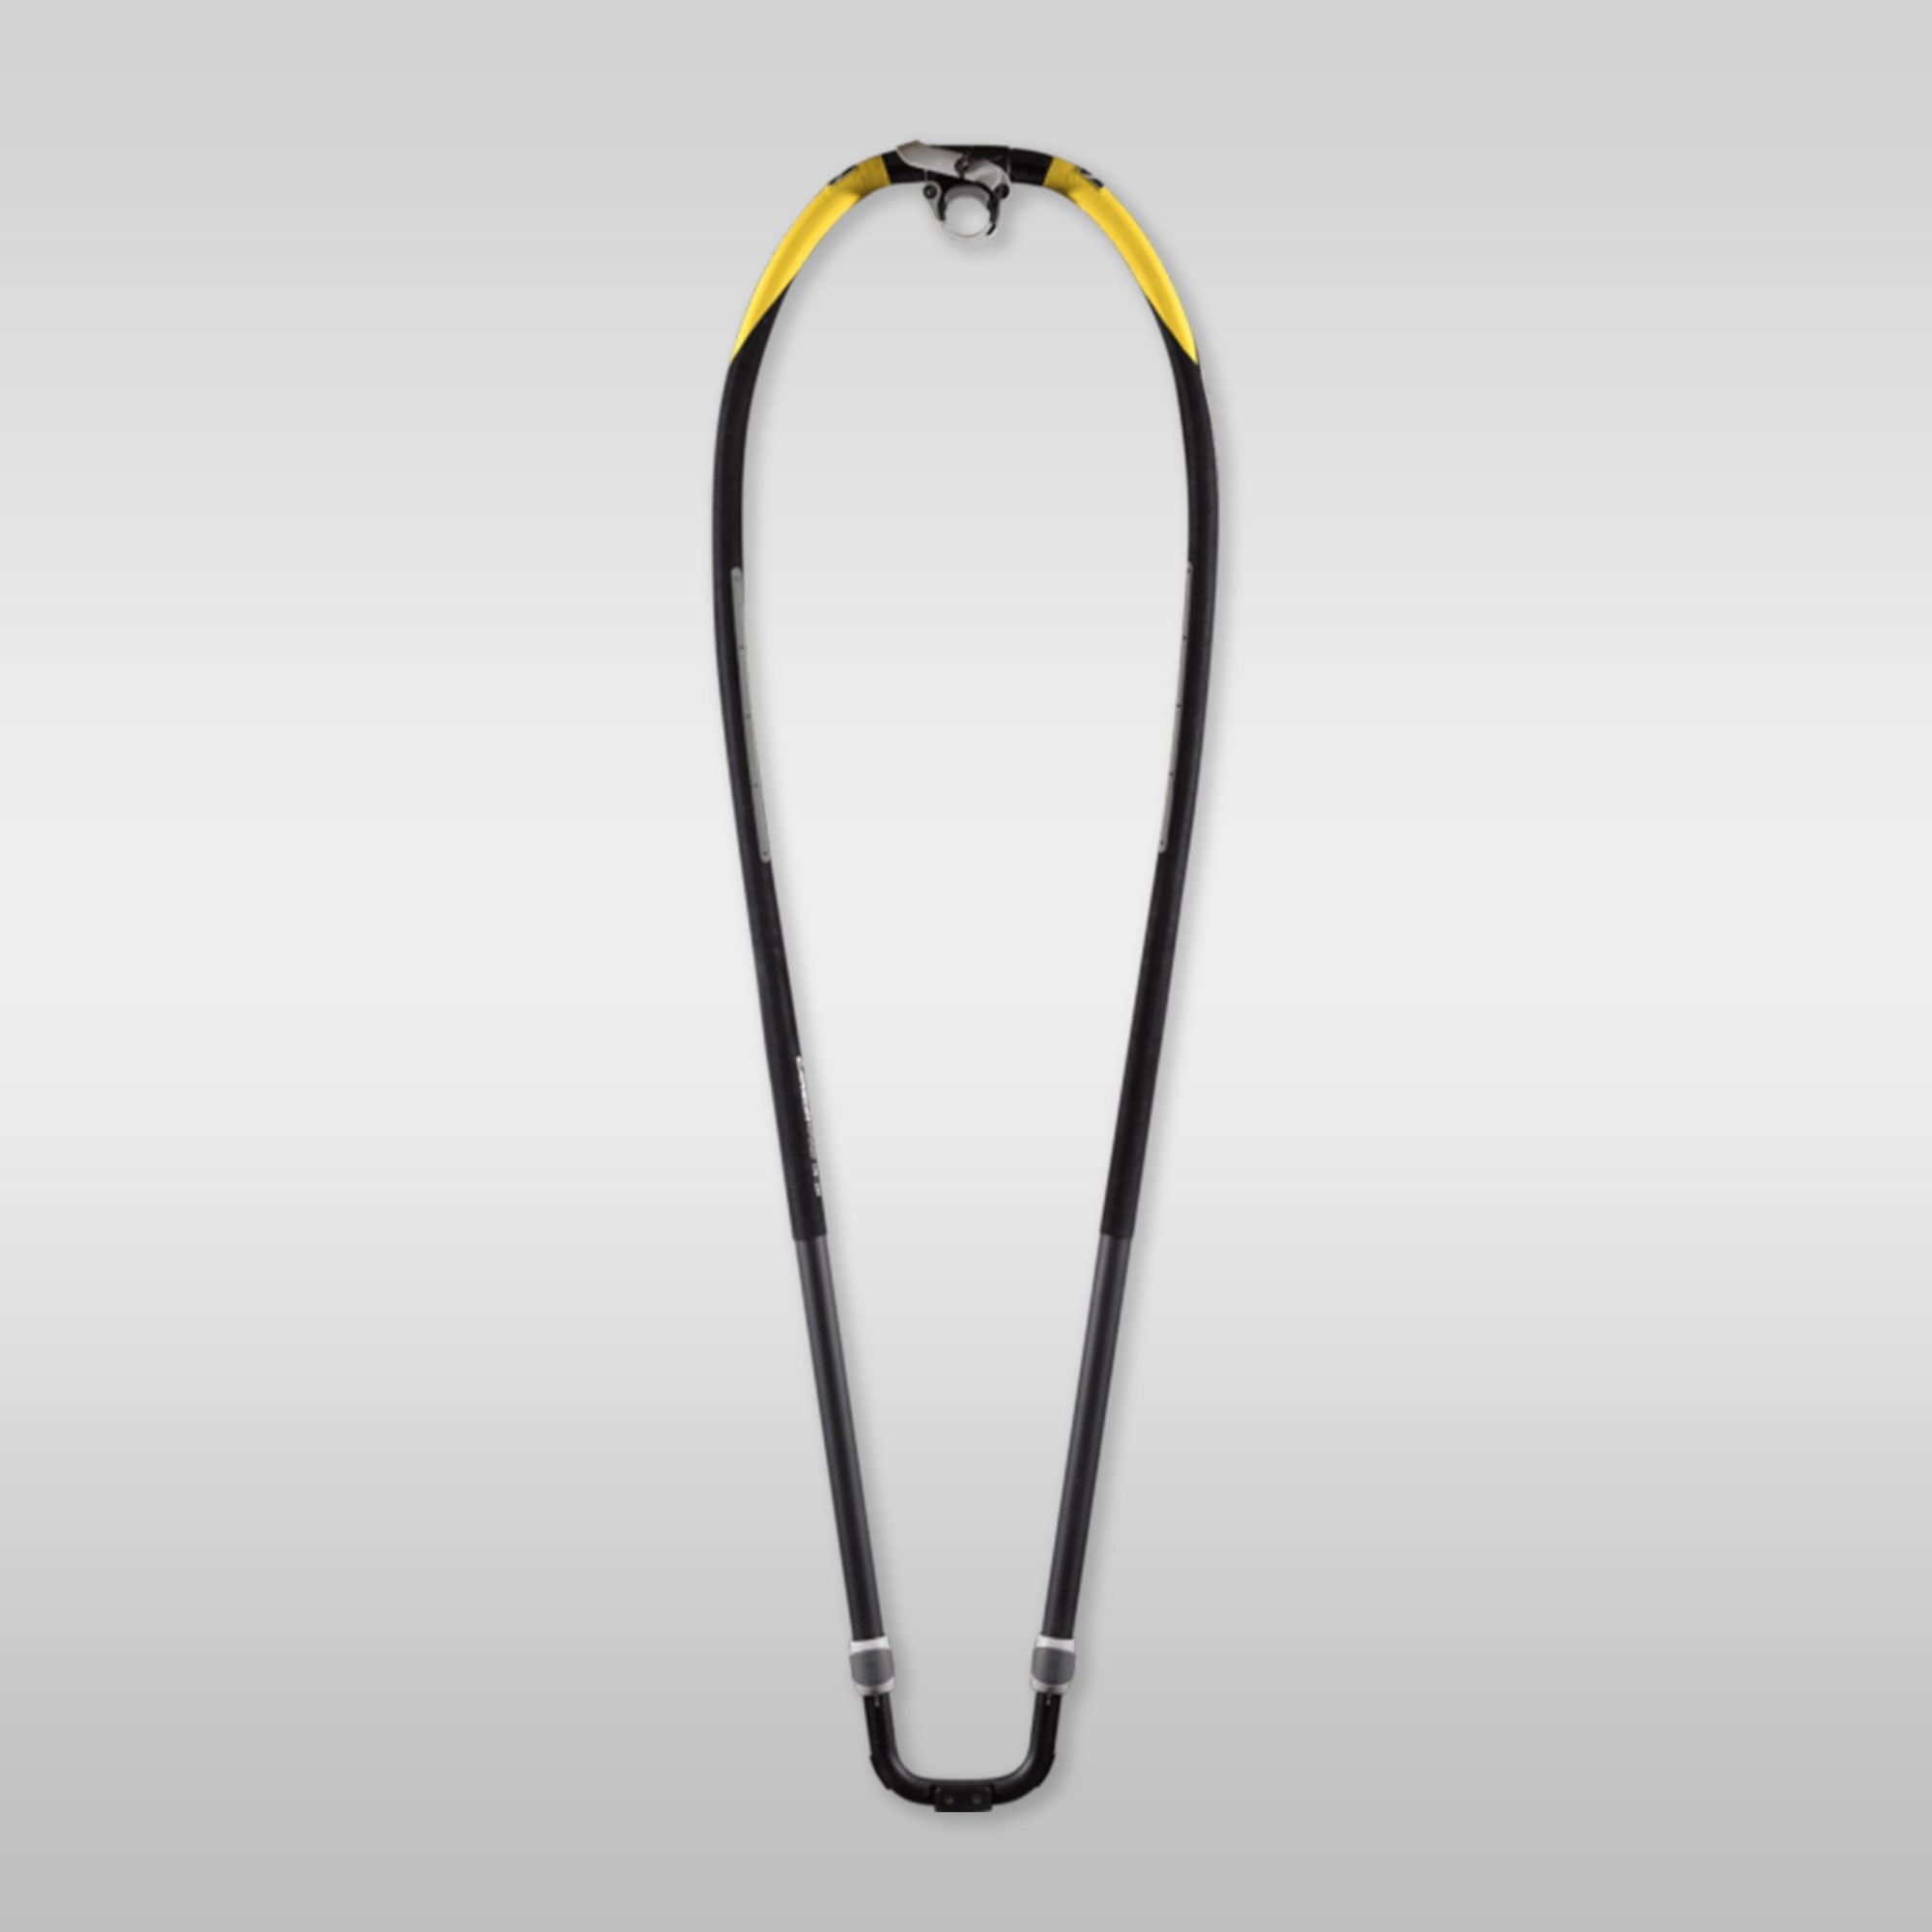 windsurfshop windsurf store windsurf-shop windsurf learn Point-7 boom